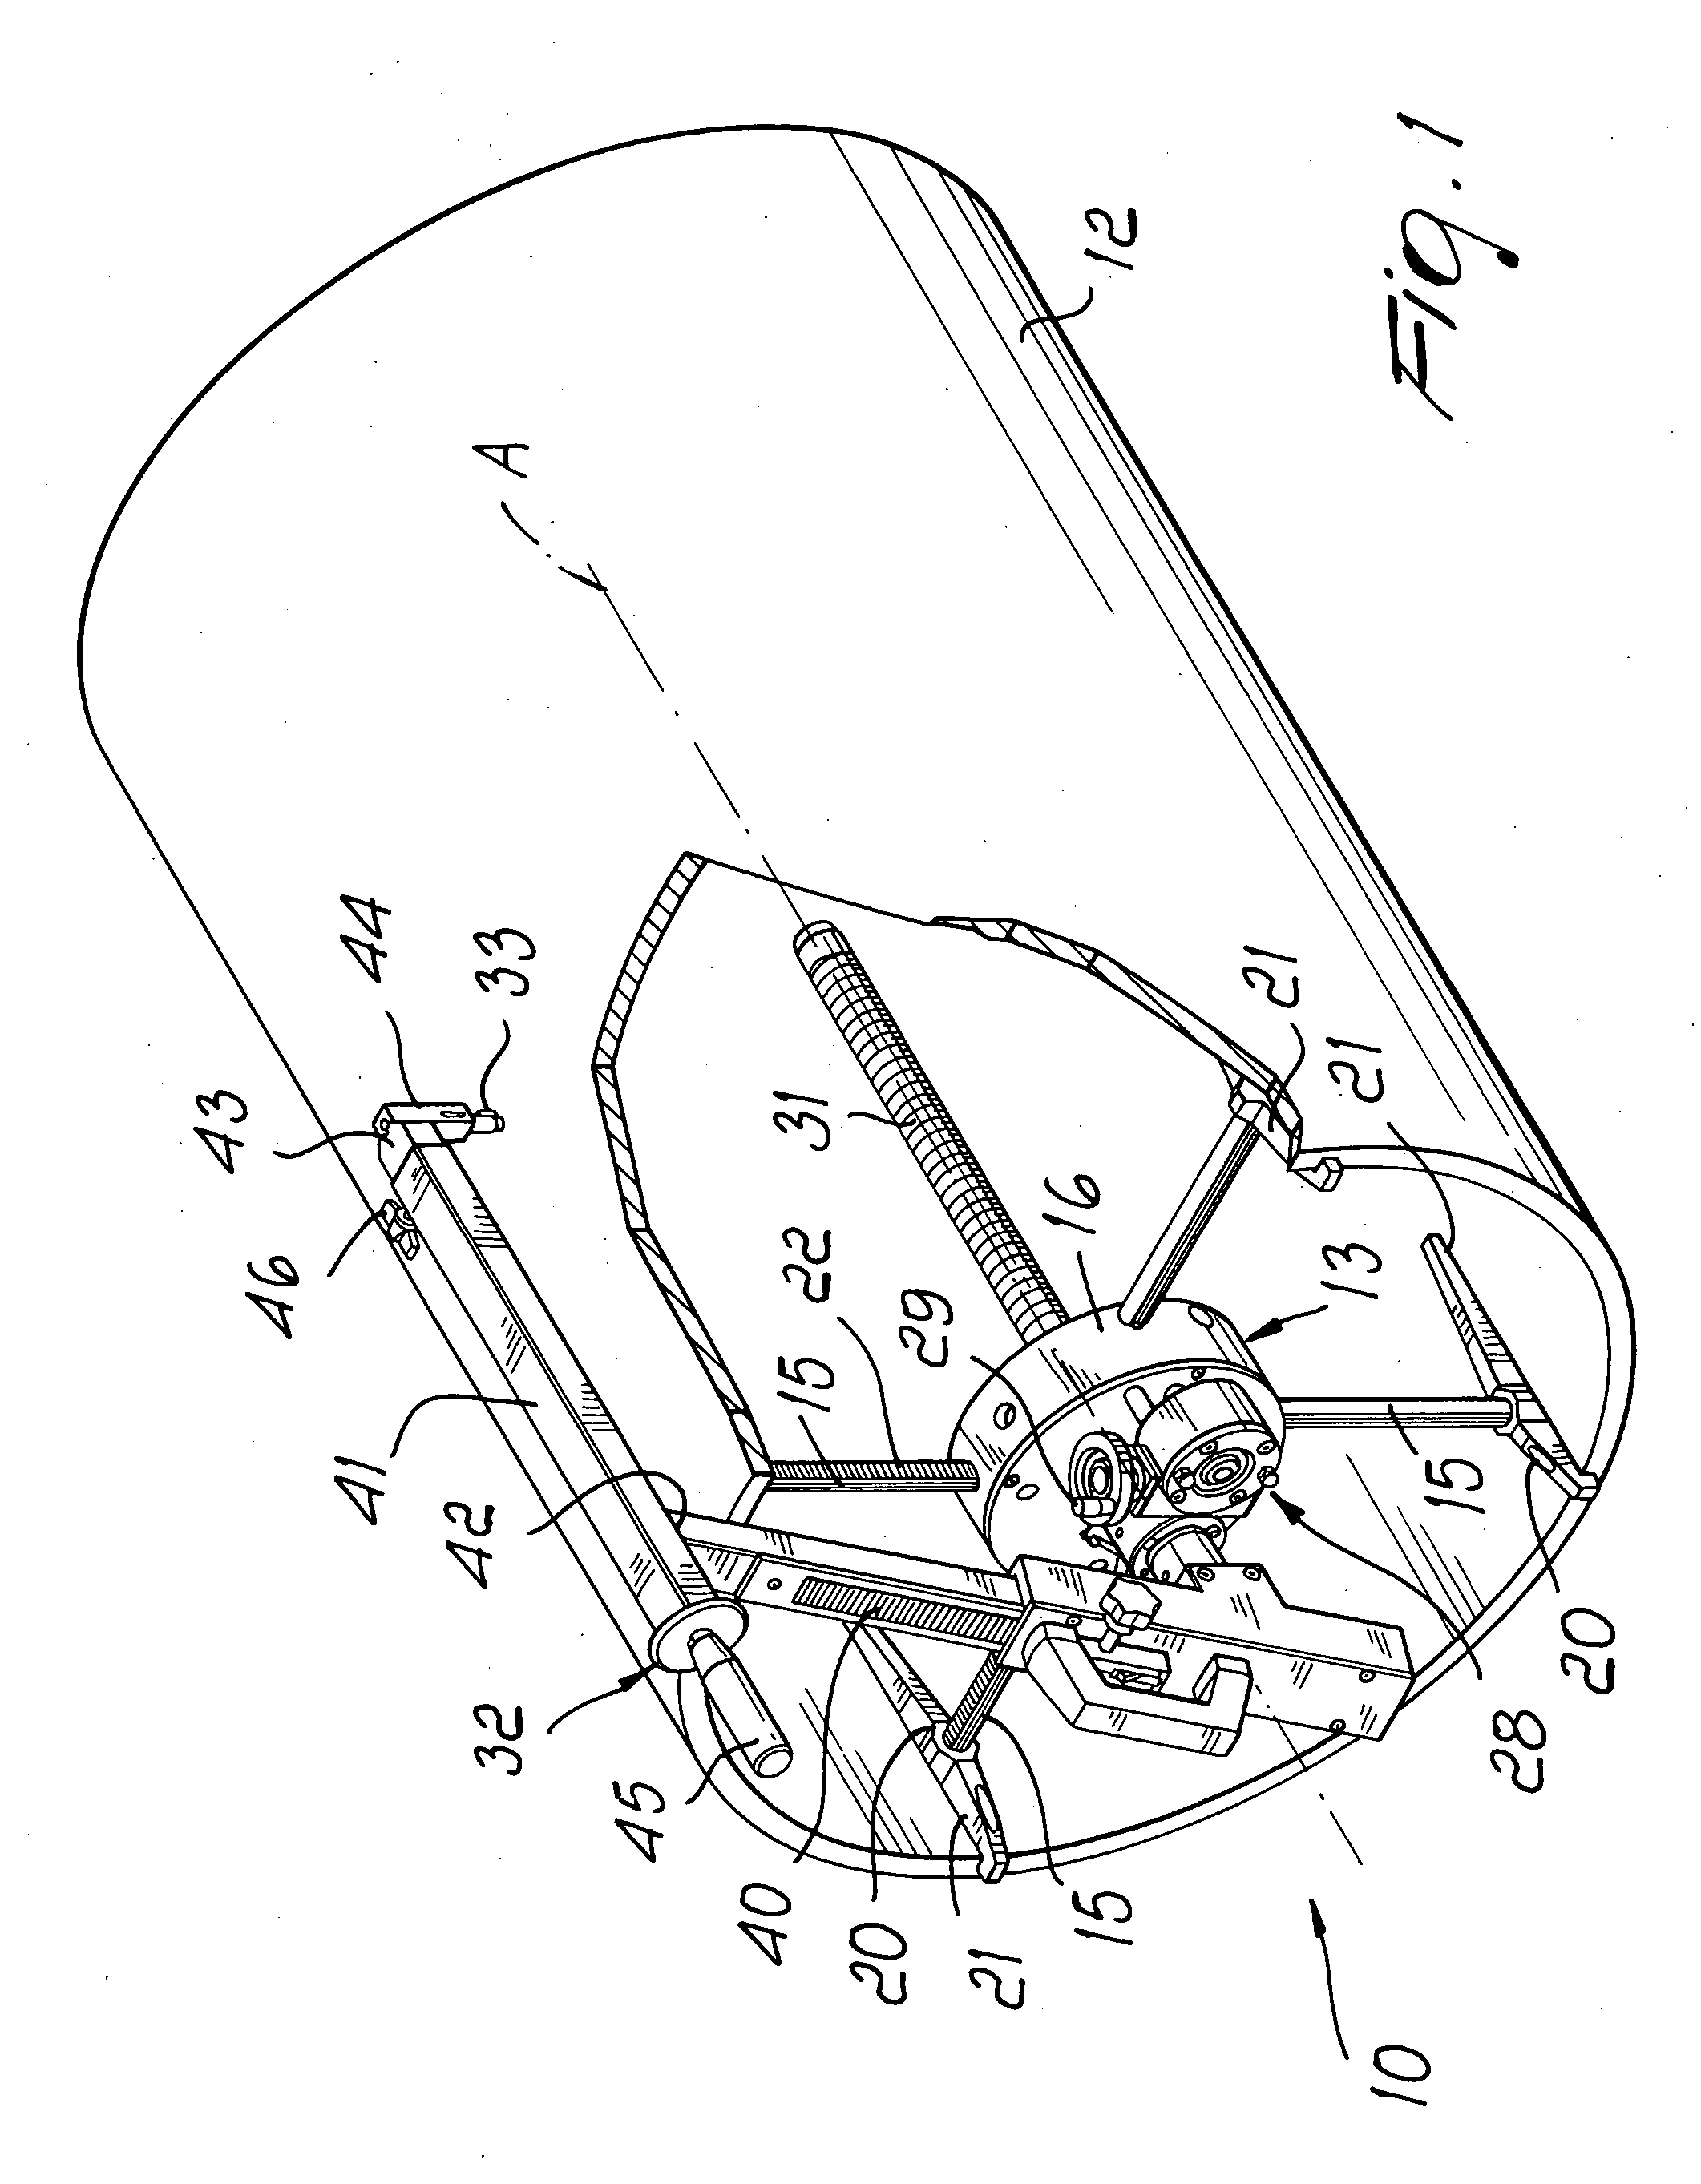 Apparatus for preparing the welding region on the outer surface of plastic pipes